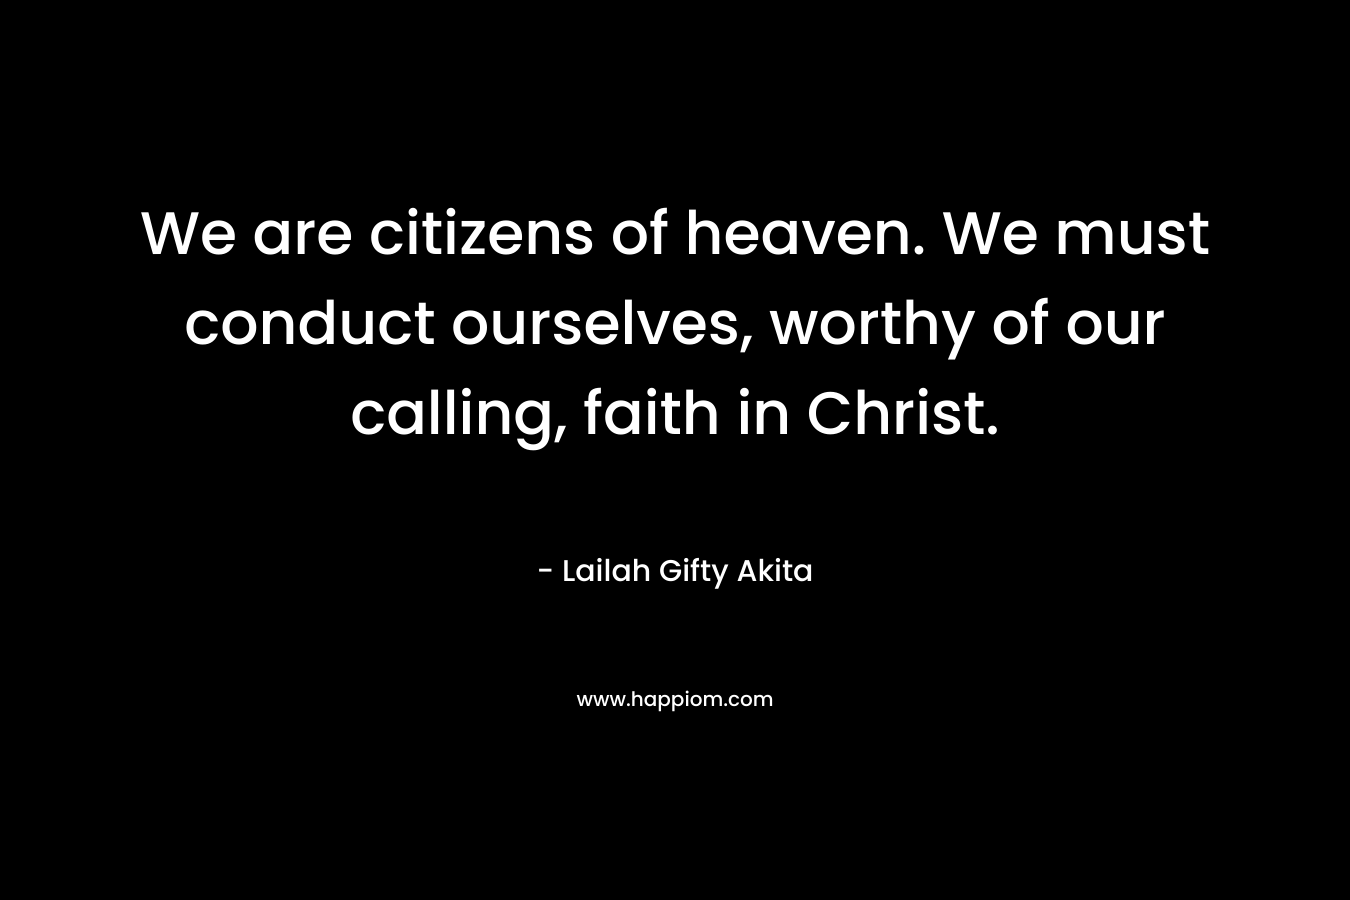 We are citizens of heaven. We must conduct ourselves, worthy of our calling, faith in Christ.